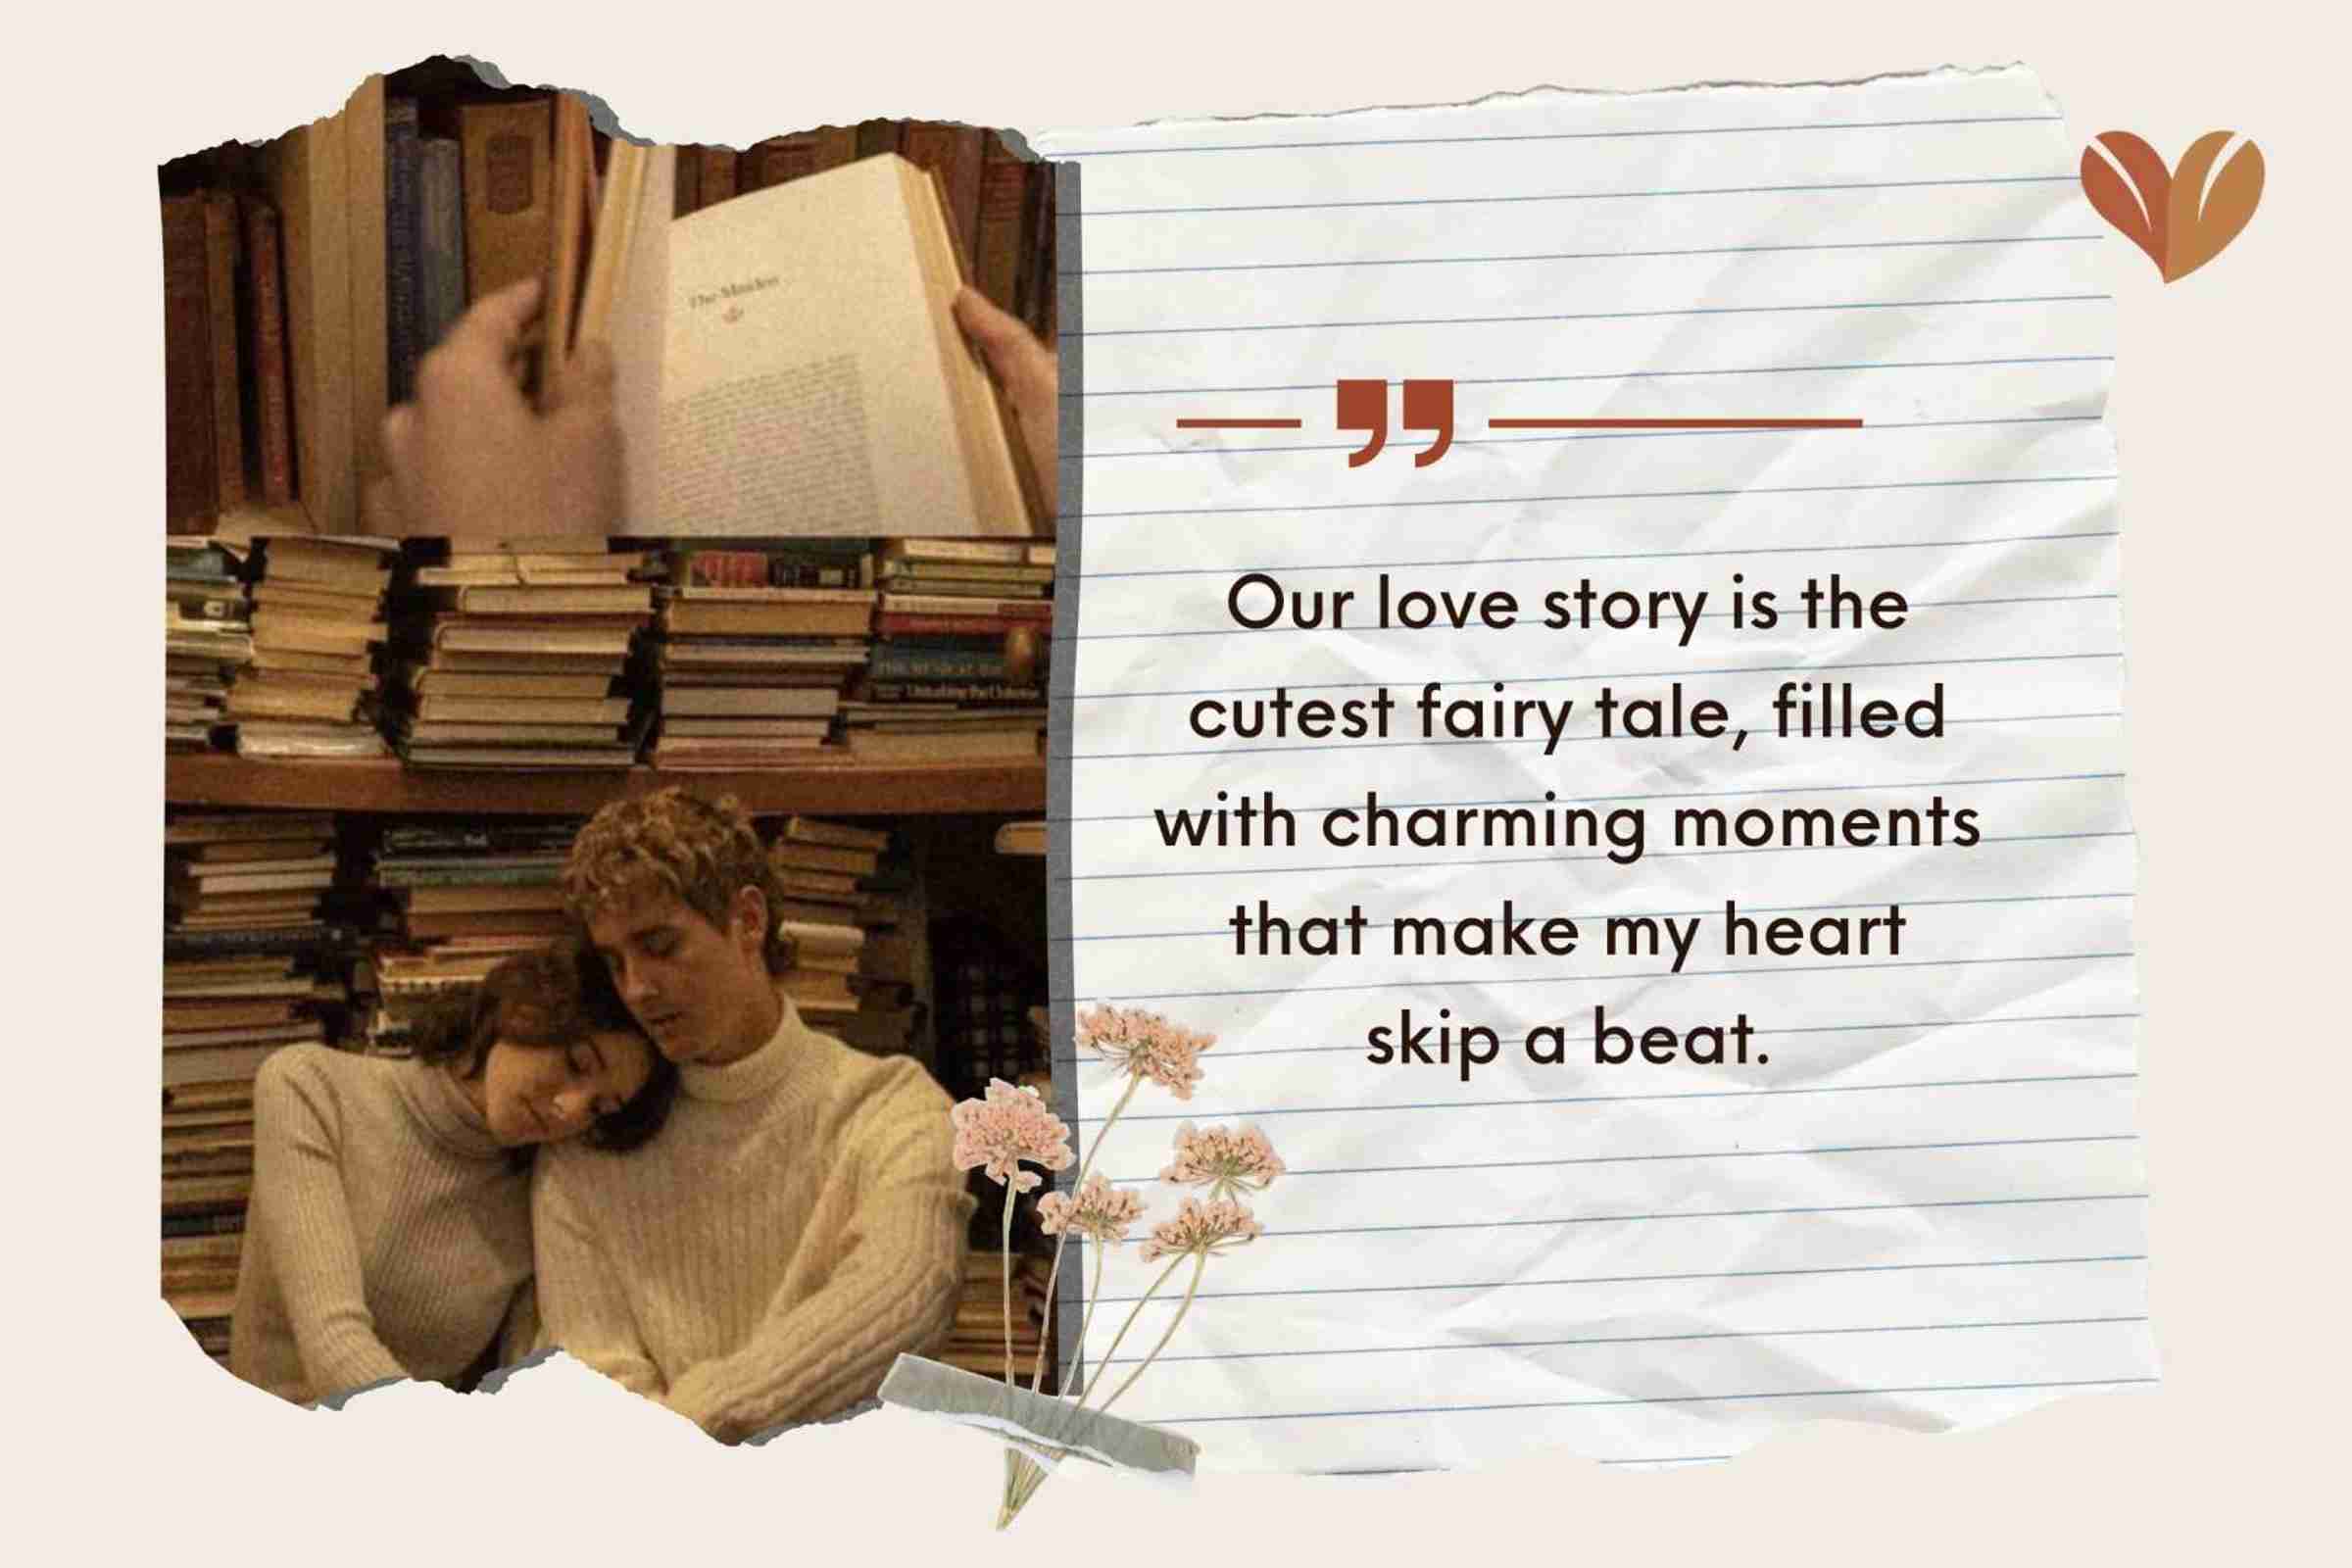 Our love story is the cutest fairy tale, filled with charming moments that make my heart skip a beat.